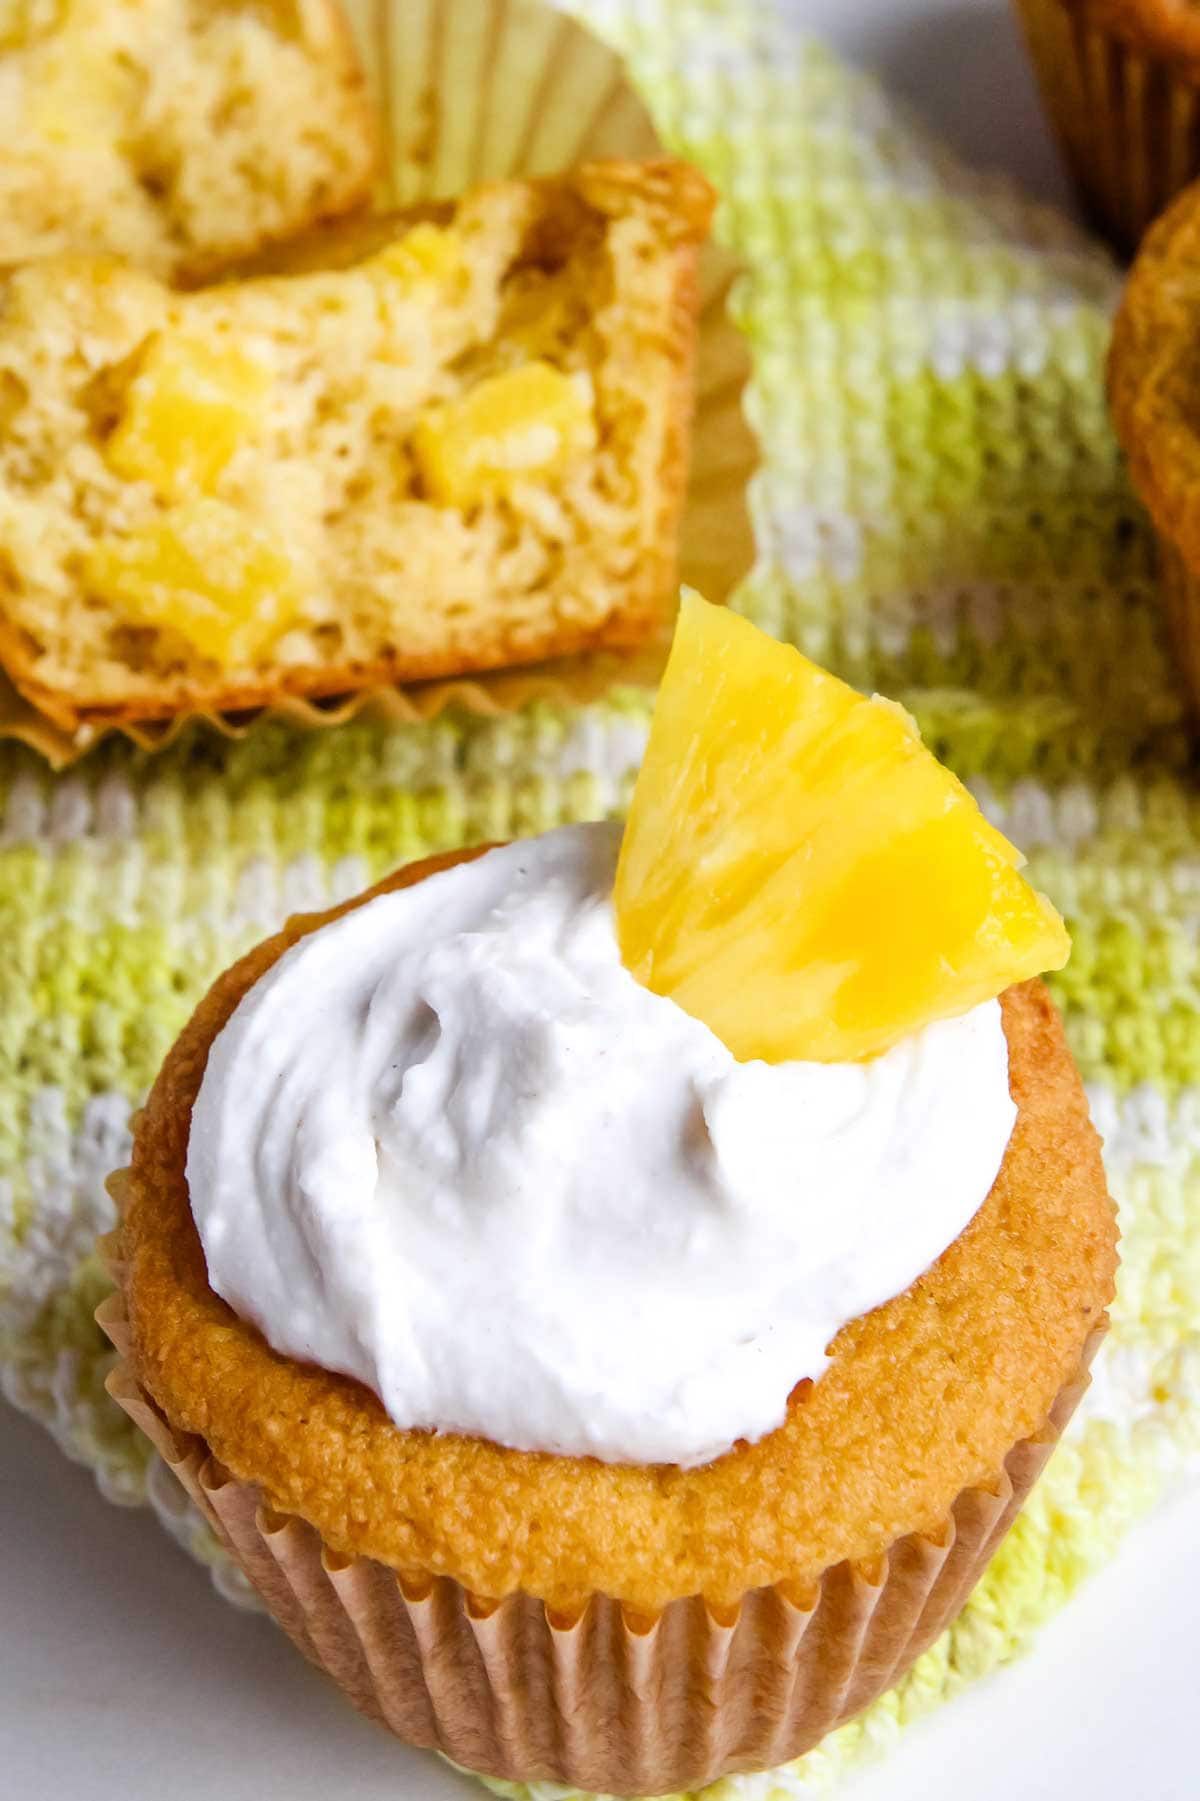 Gluten Free Pineapple muffins made with coconut flour